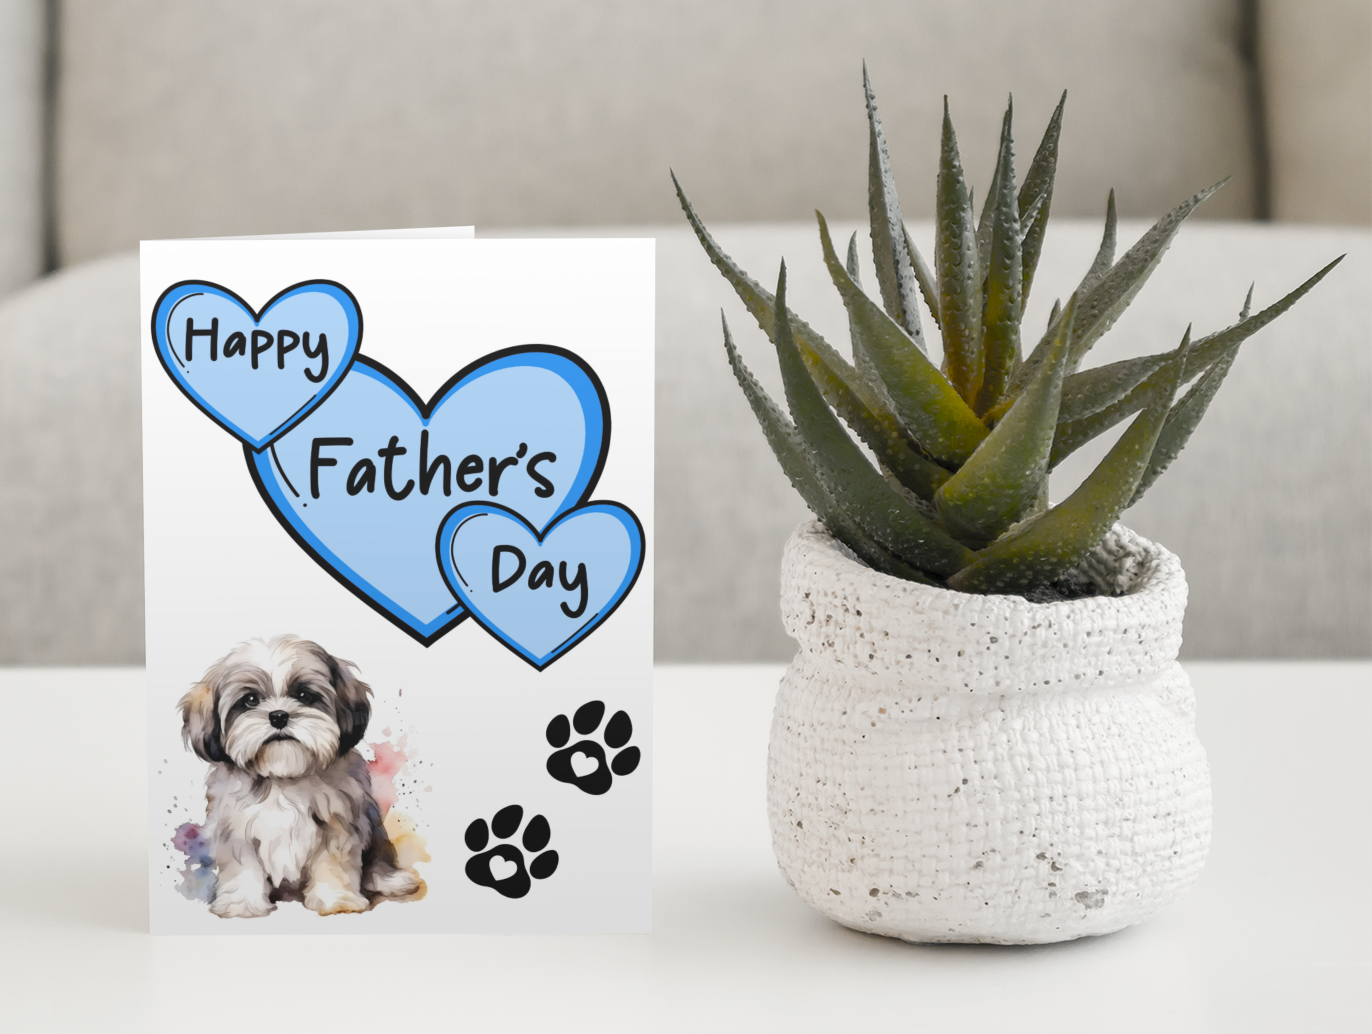 Lhasa Apso Father's Day Card - Nice Cute Fun Pet Dog Puppy Owner Novelty Greeting Card